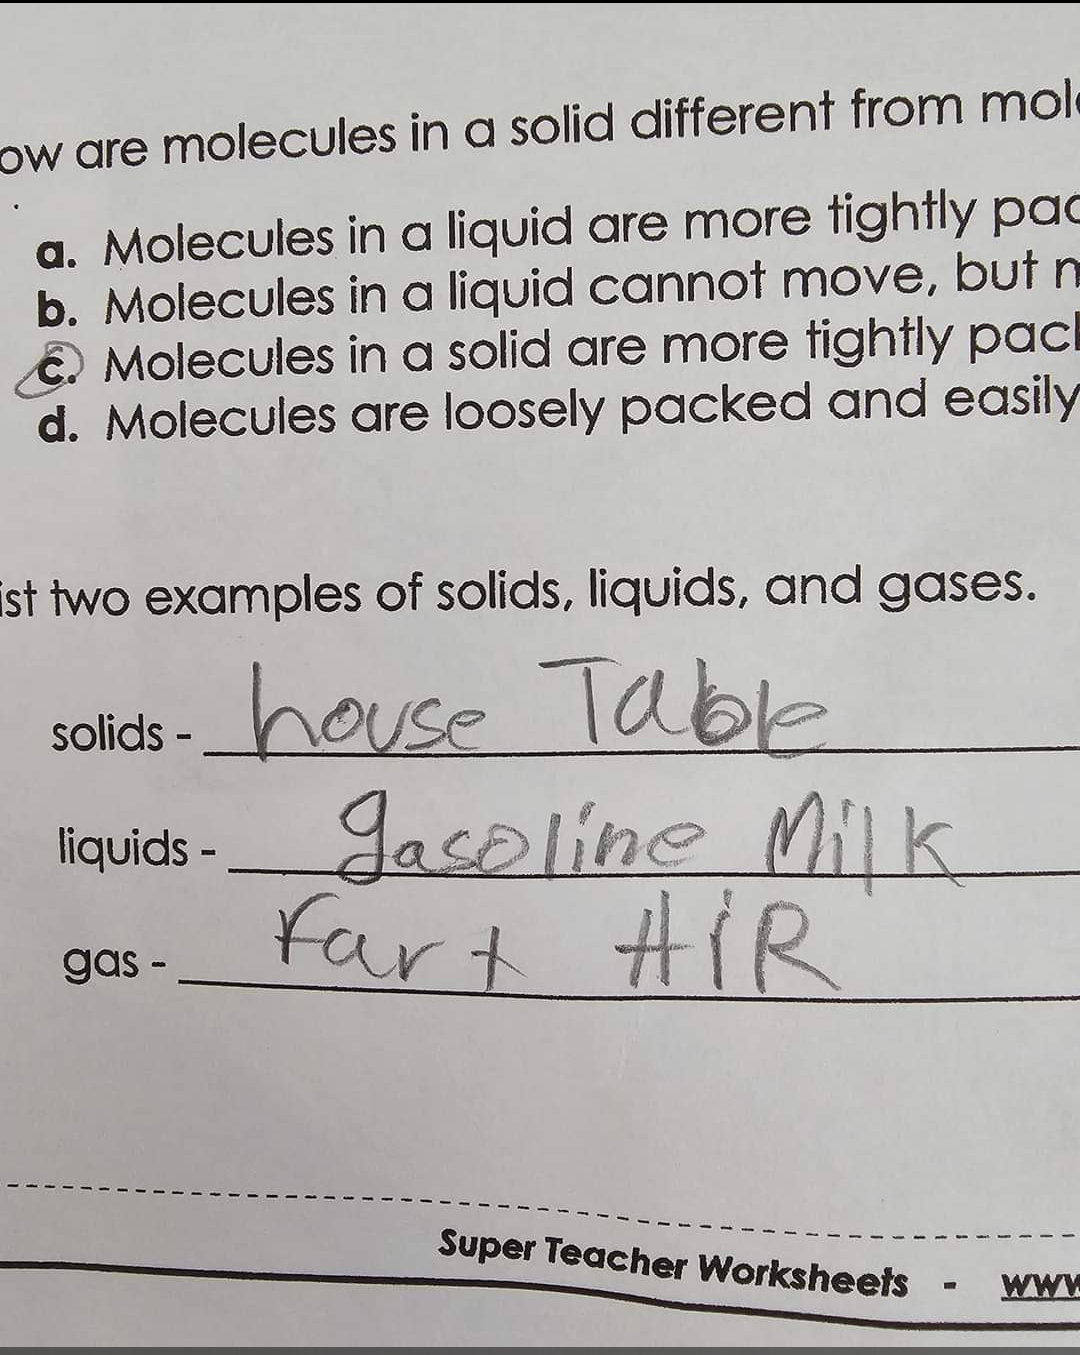 In a test question asking for two examples of solids, liquids, and gases, student answers &quot;house table&quot; for solids, &quot;gasoline milk&quot; for liquids, and &quot;fart air&quot; for gas